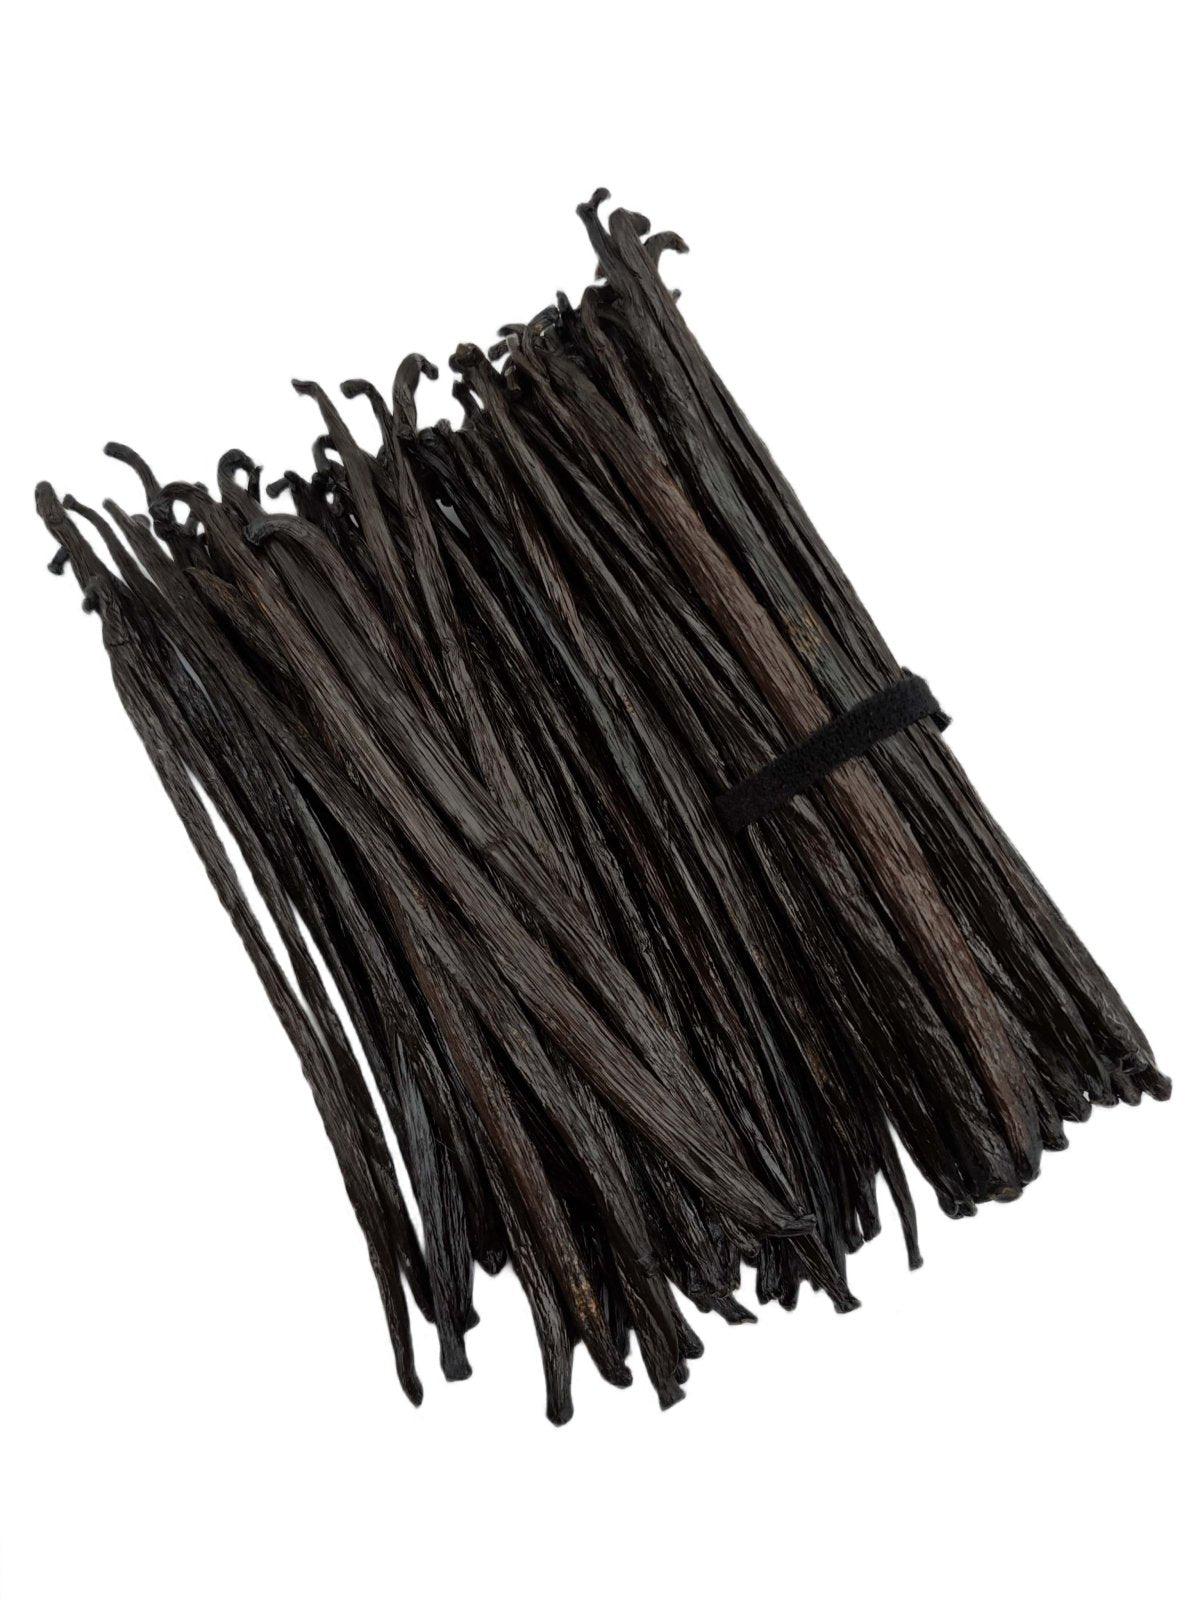 Indonesian Planifolia Gourmet Grade-A Vanilla Beans<br>For Extract And Baking<BR>5 count, 15 count, 25 count, 50 count, 100 count - Spice-Land Wholesale